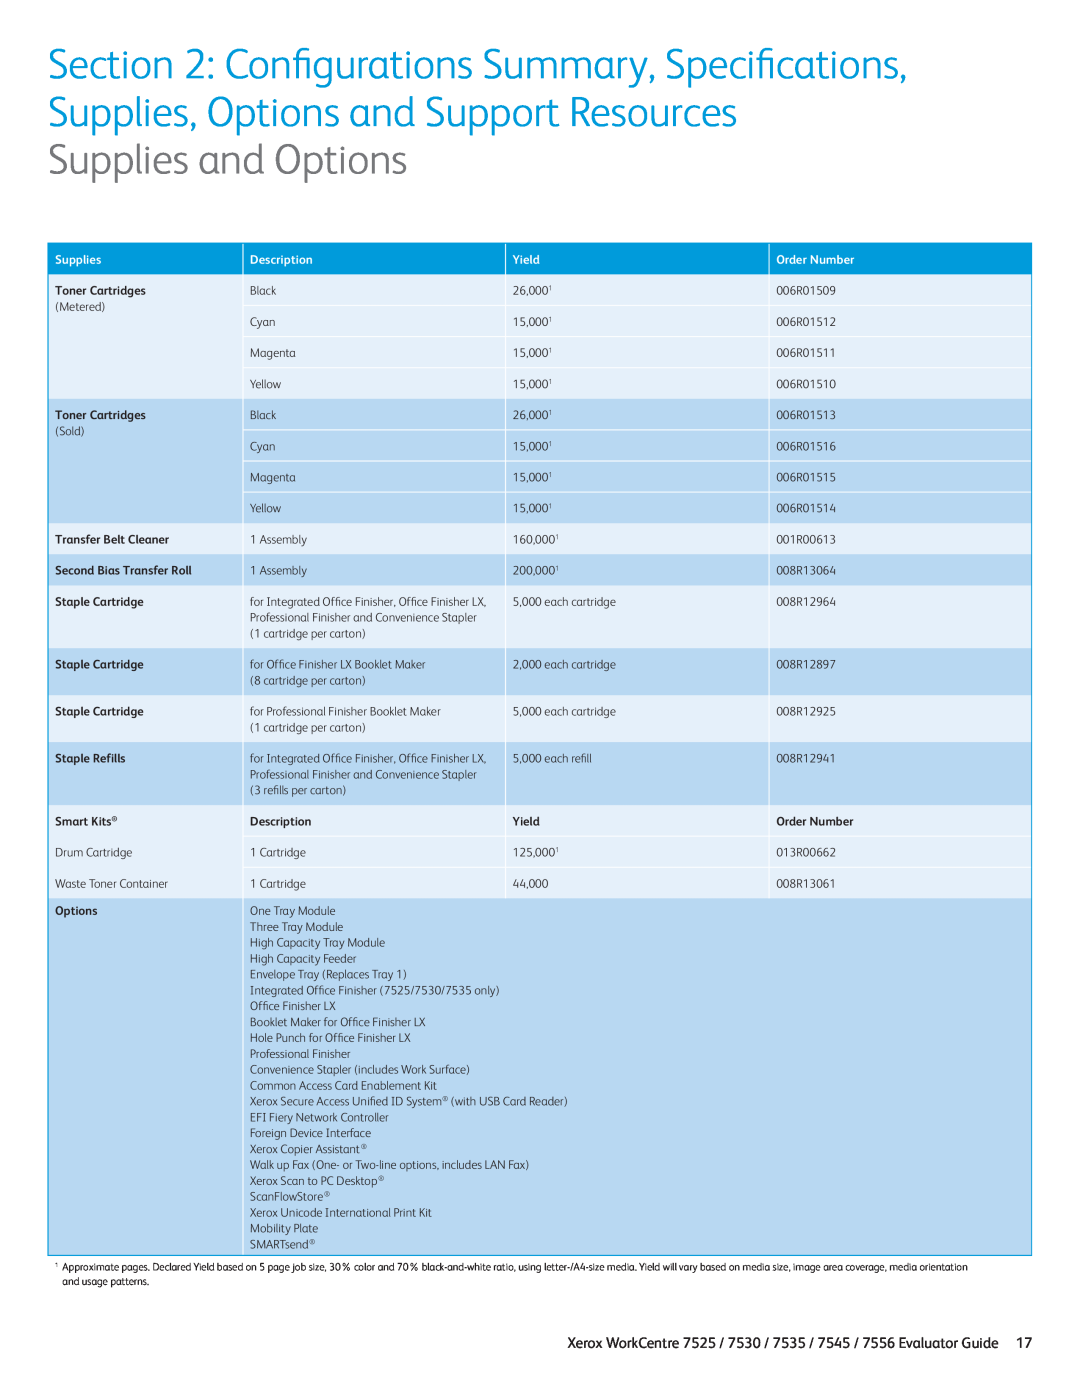 Xerox 7535 Supplies and Options, Configurations Summary, Specifications, Supplies, Options and Support Resources, Yield 